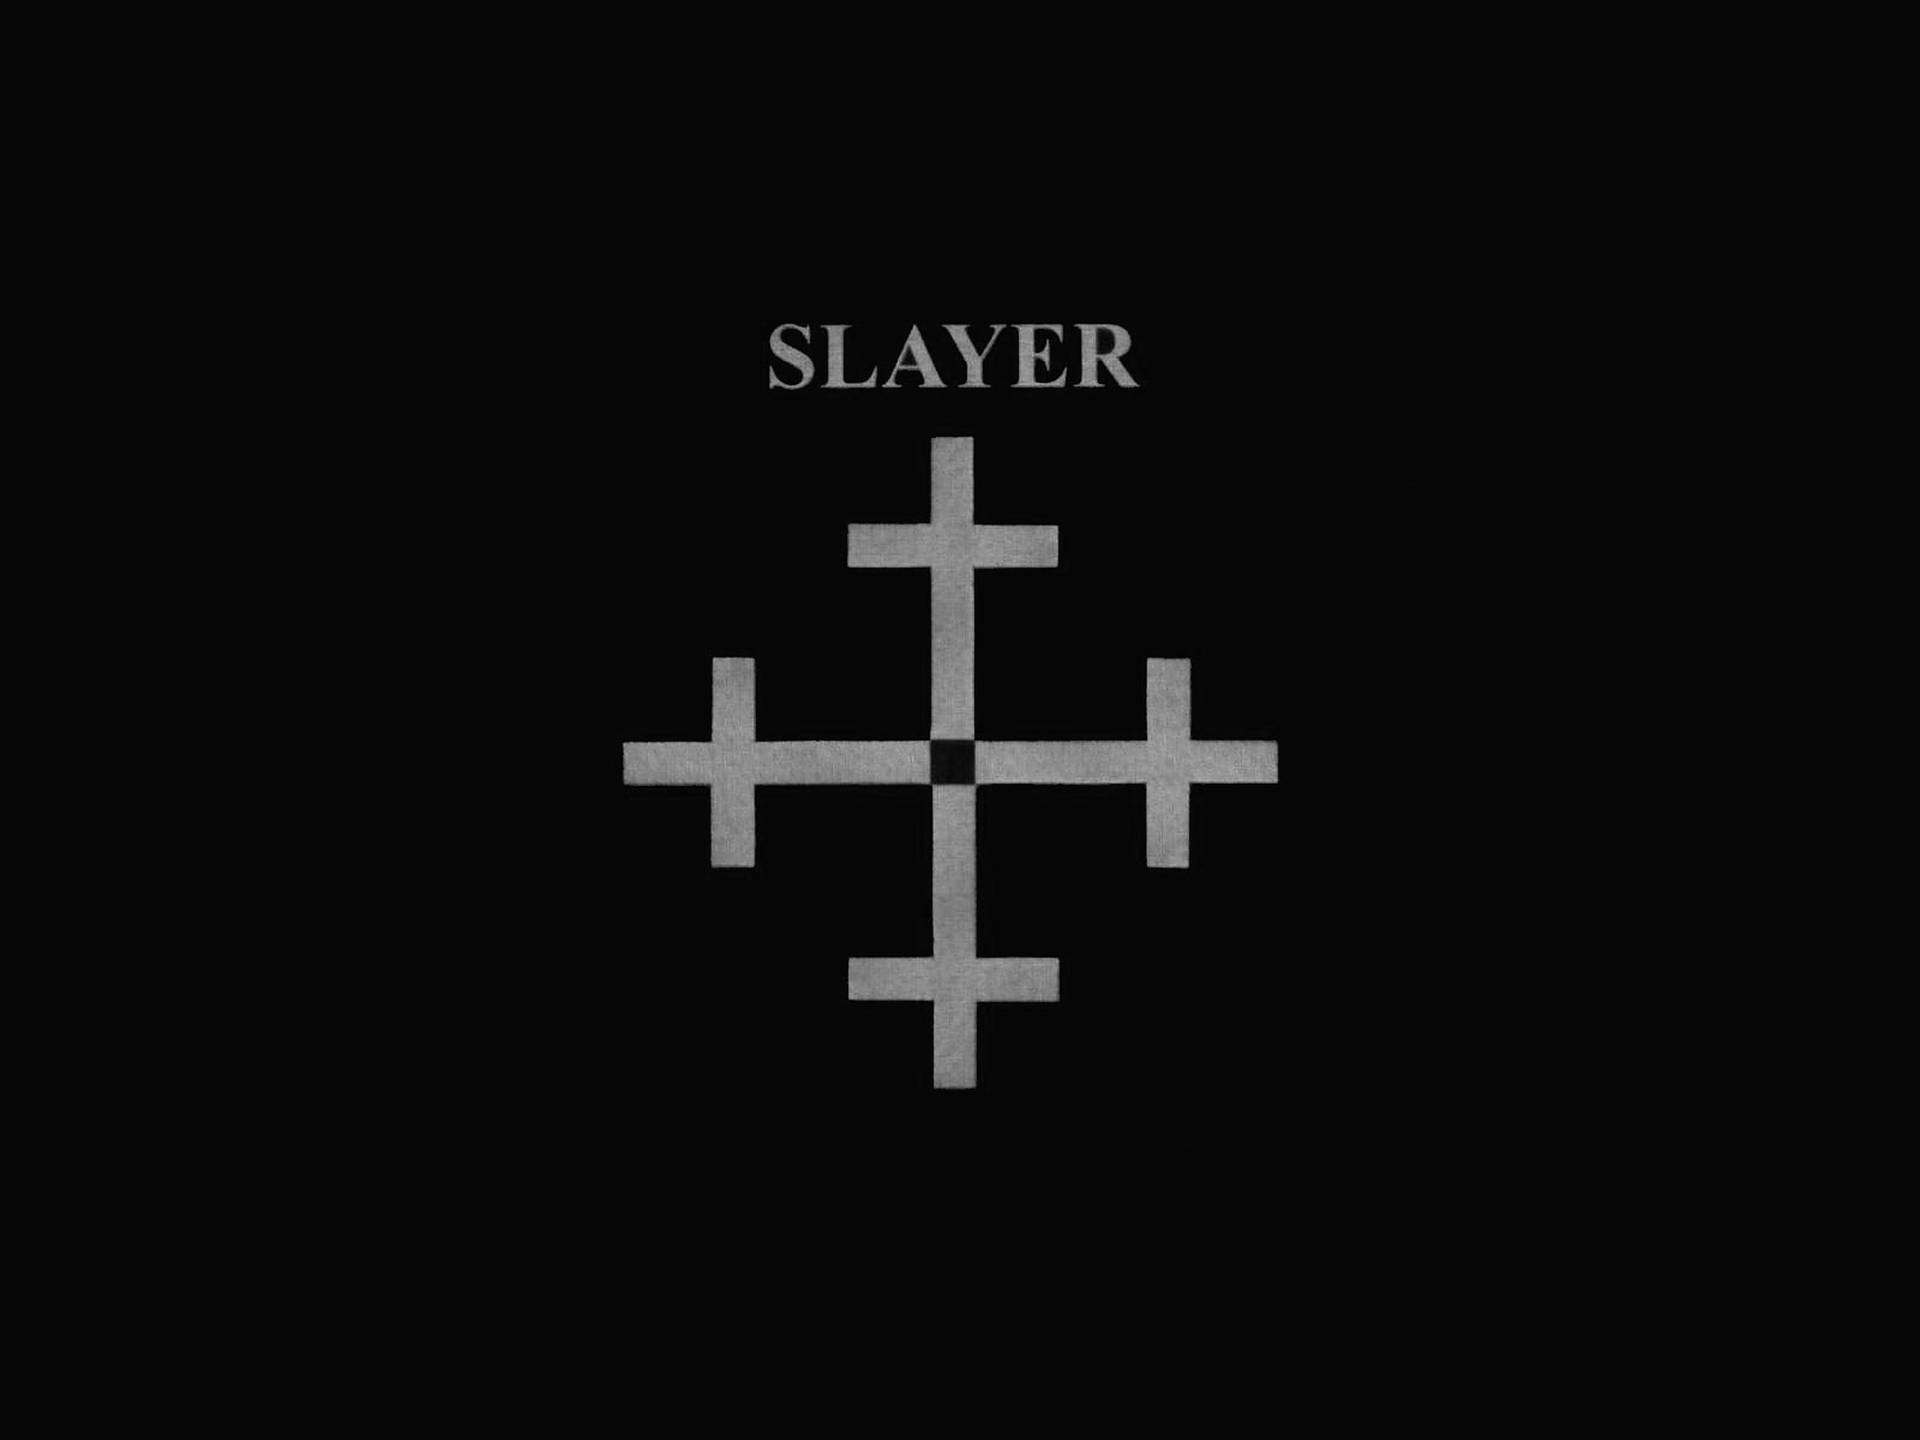 Slayer 3008X2256 Wallpaper and Background Image